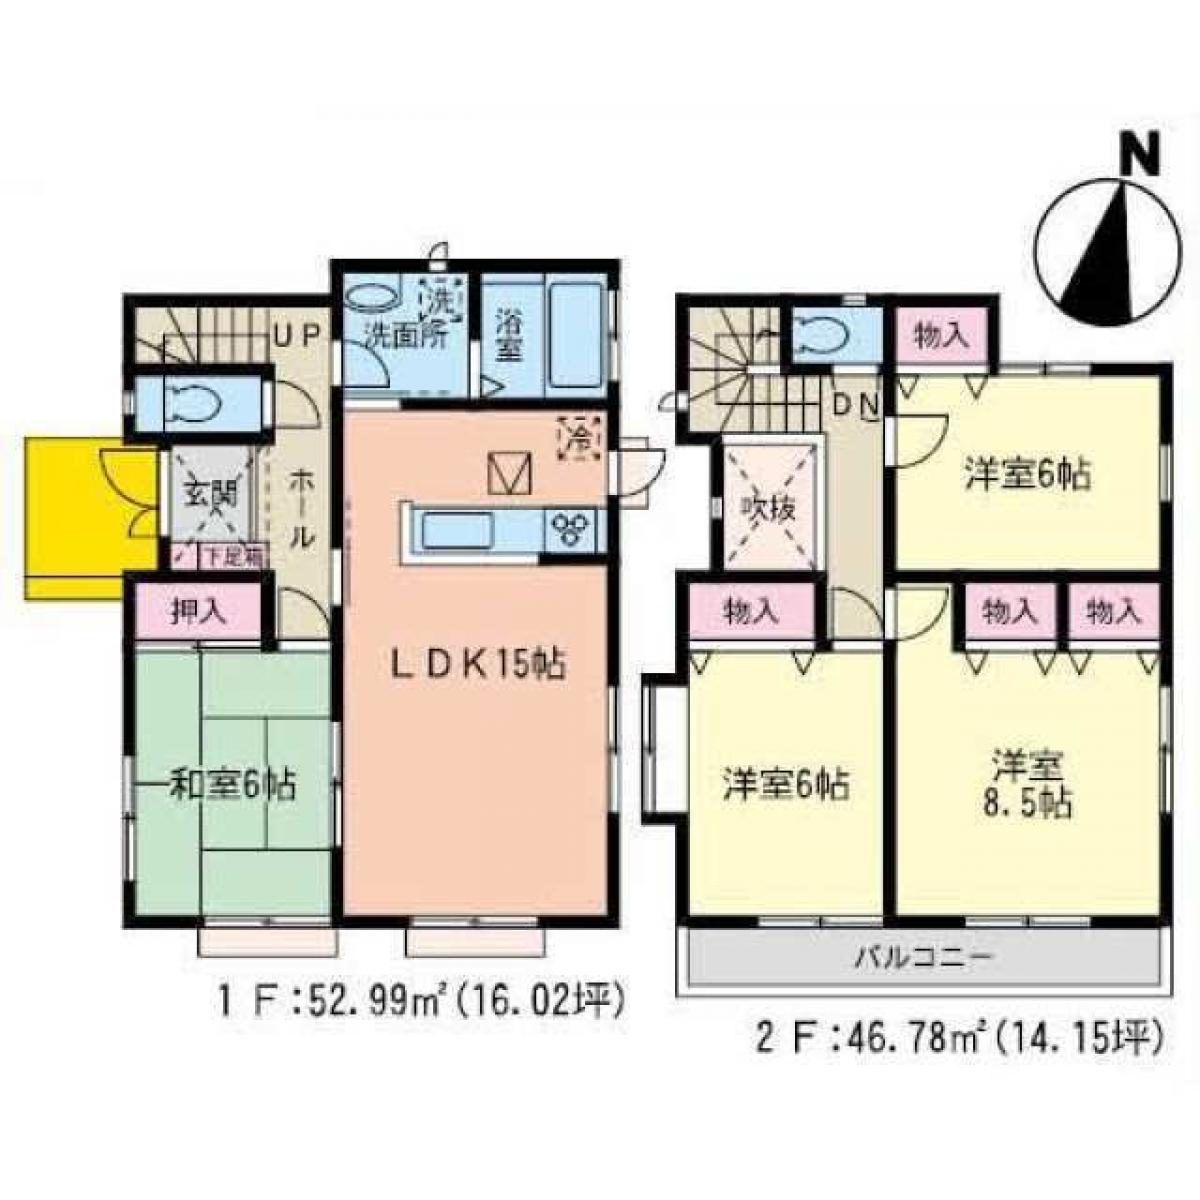 Picture of Home For Sale in Natori Shi, Miyagi, Japan